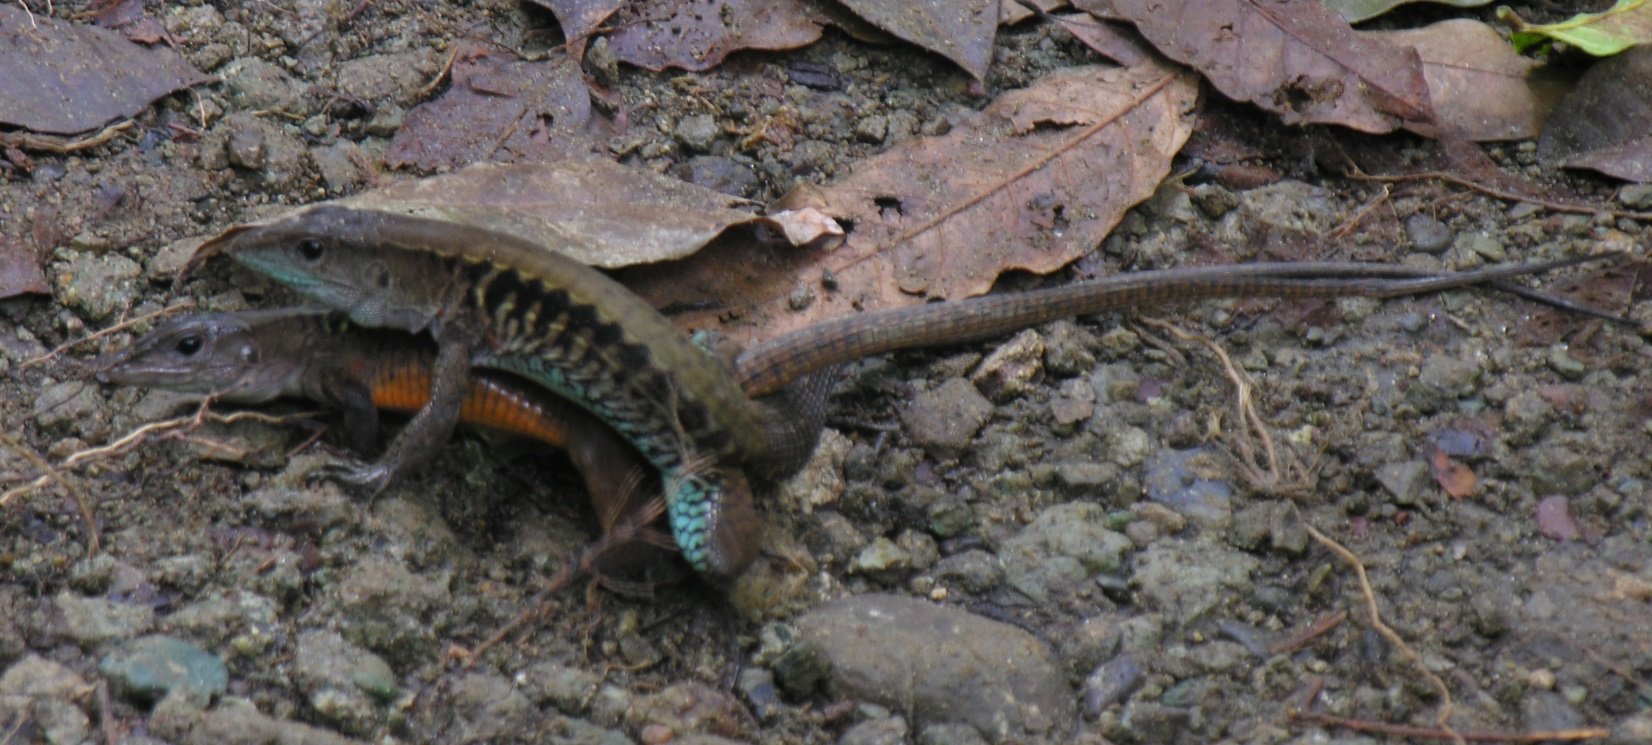 Two whiptail lizards engaging in asexual mating; credit: Jodi [Flickr]